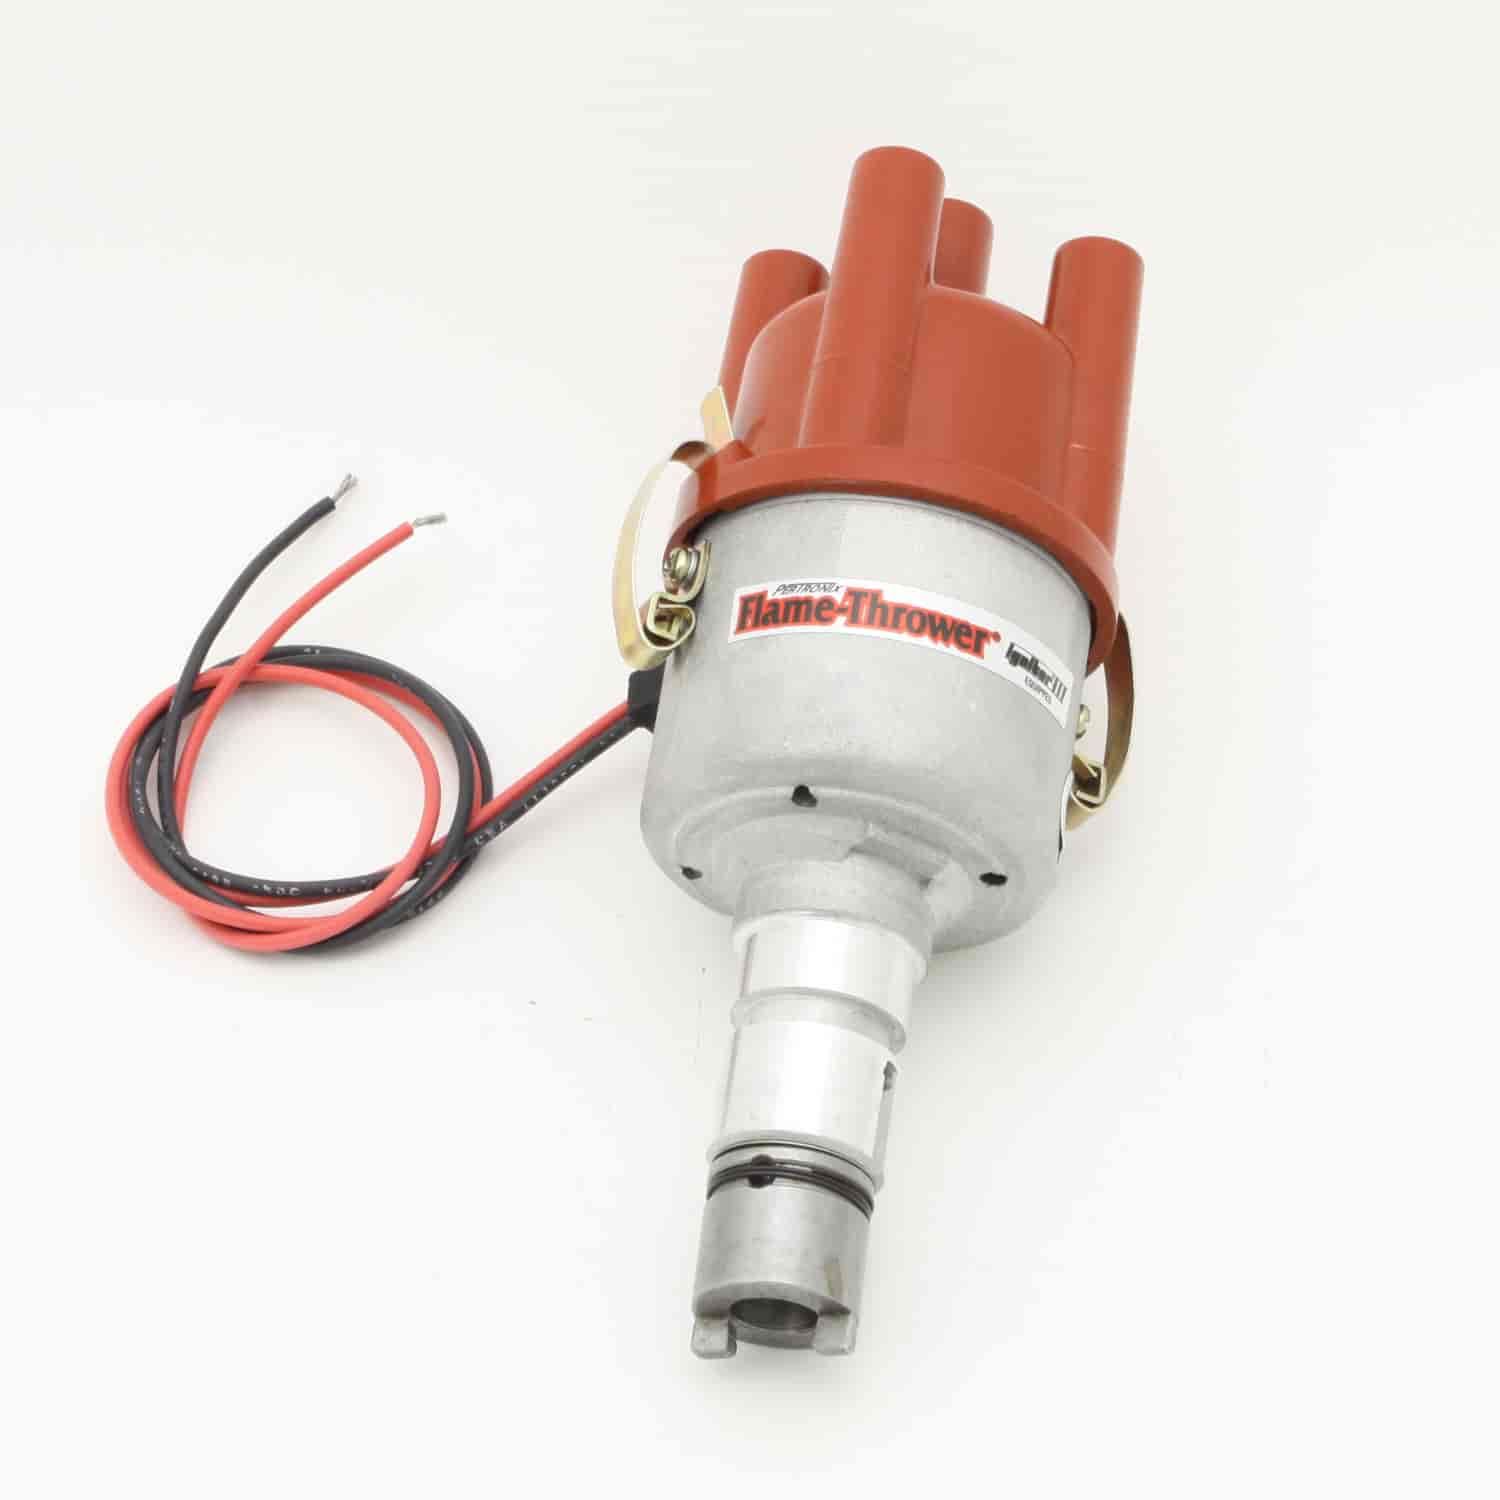 PerTronix D7181604 Flame-Thrower Electronic Distributor Cast Alfa Romeo Plug and Play with Ignitor III Non Vacuum